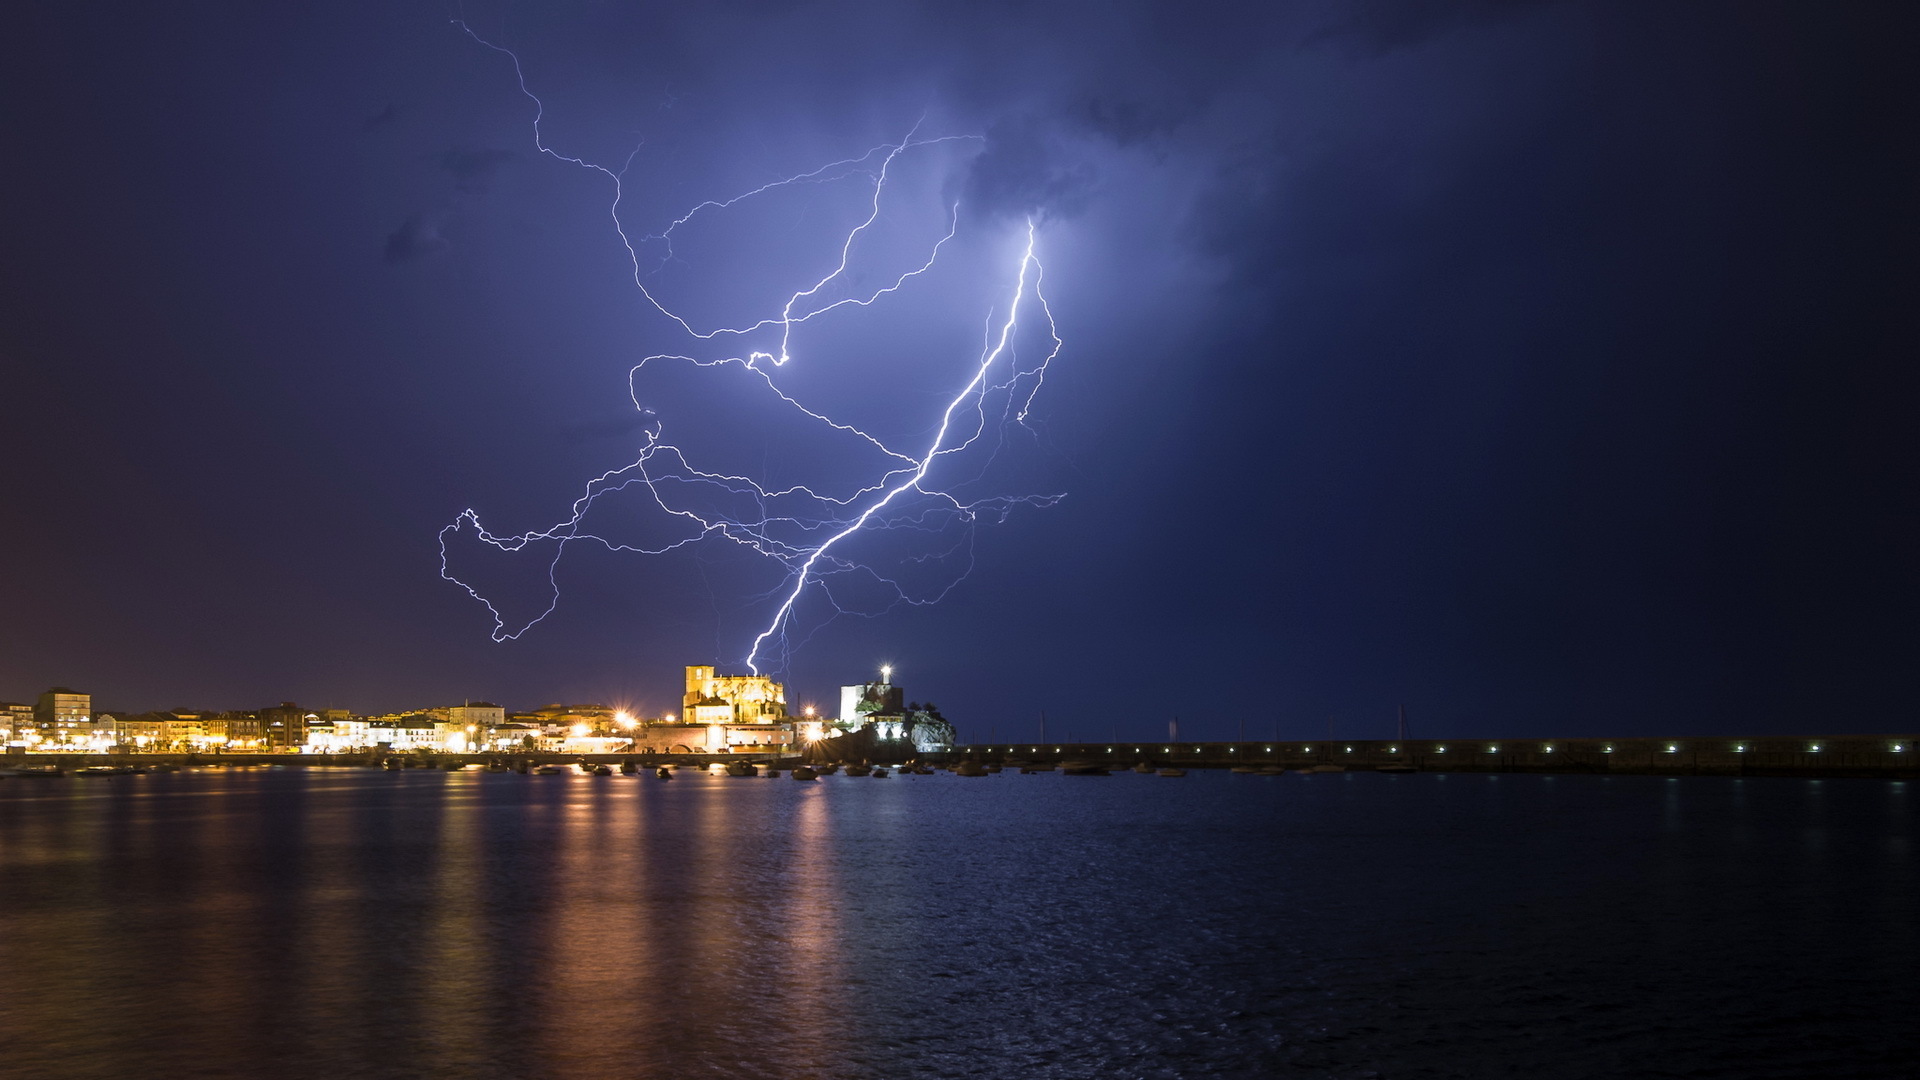 lightning, Photography, Waterways, Water, Scenic, Nature, Cities, Architecture, Storms, Skies, Clouds, Rain Wallpaper